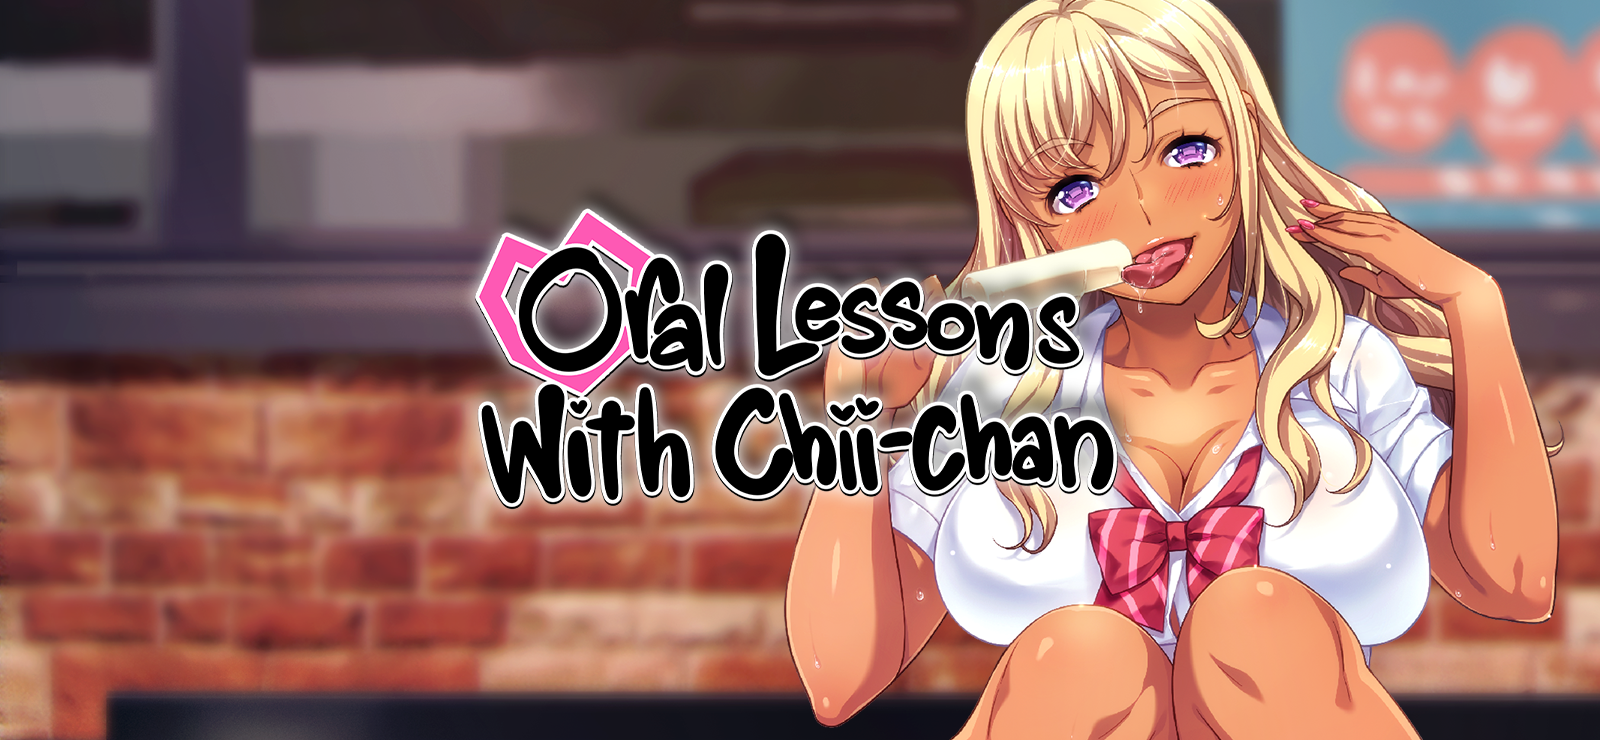 Oral Lessons With Chii-chan